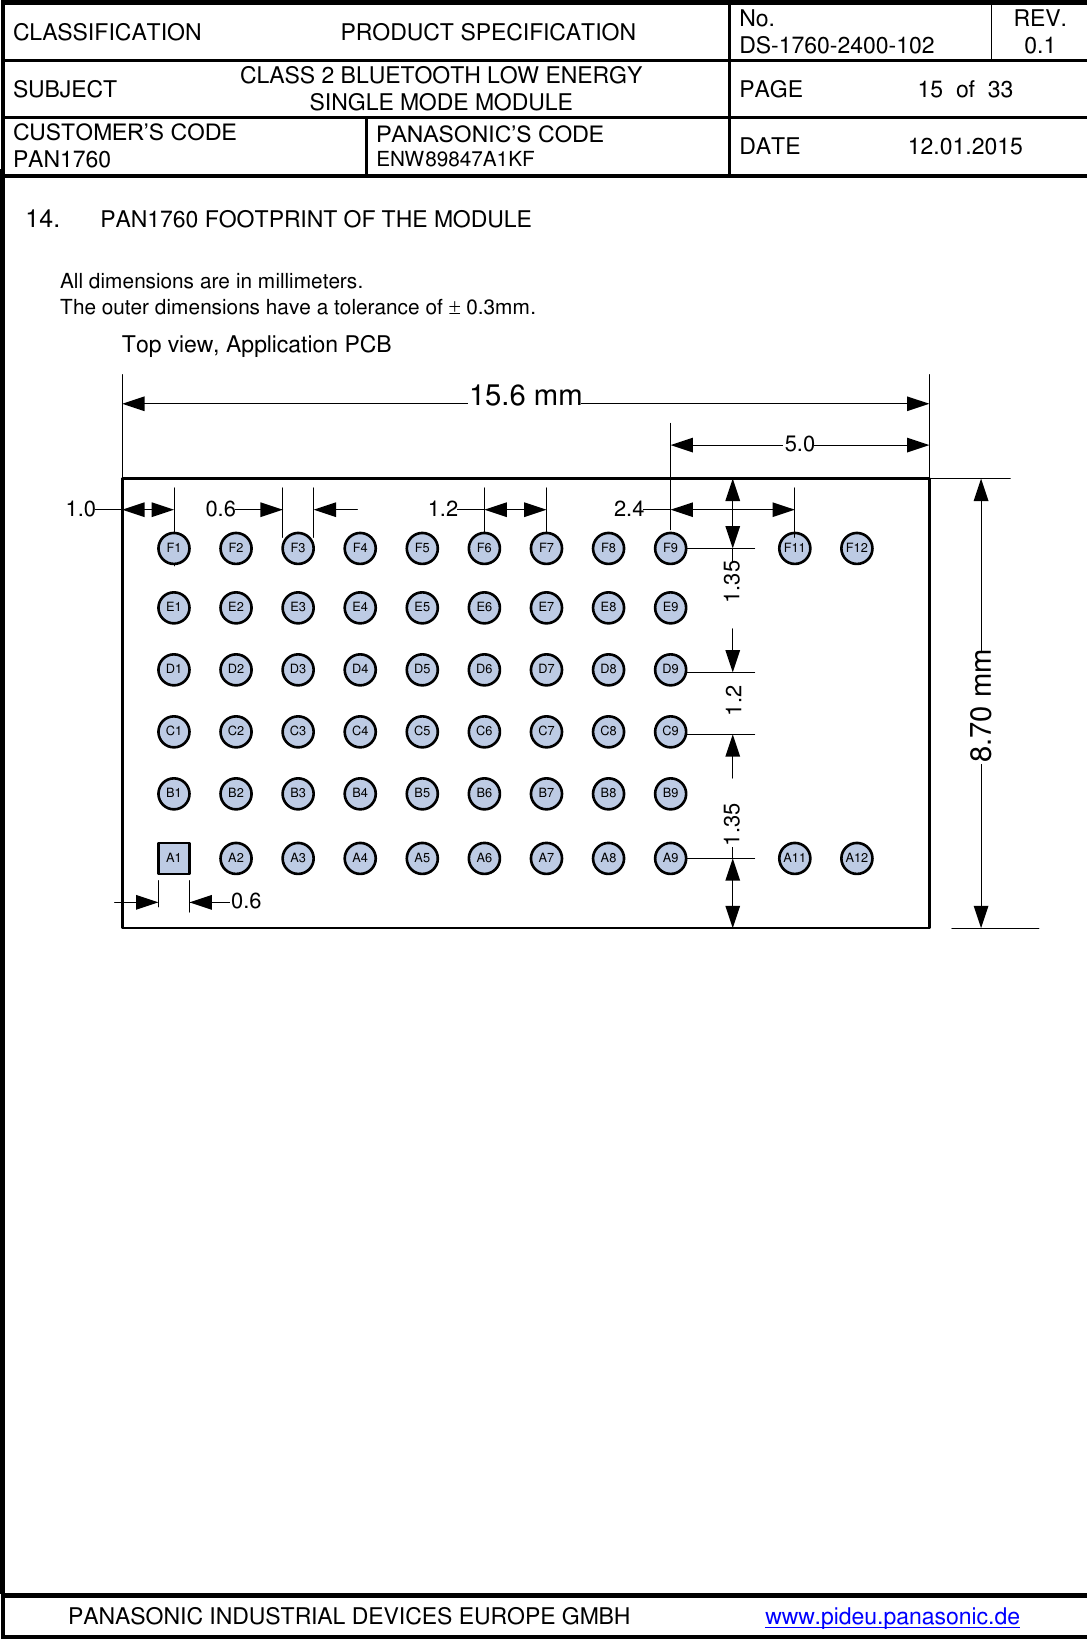 CLASSIFICATION PRODUCT SPECIFICATION No. DS-1760-2400-102 REV. 0.1 SUBJECT CLASS 2 BLUETOOTH LOW ENERGY  SINGLE MODE MODULE PAGE 15  of  33 CUSTOMER’S CODE PAN1760 PANASONIC’S CODE ENW89847A1KF  DATE 12.01.2015   PANASONIC INDUSTRIAL DEVICES EUROPE GMBH www.pideu.panasonic.de  14. PAN1760 FOOTPRINT OF THE MODULE  All dimensions are in millimeters. The outer dimensions have a tolerance of  0.3mm. Top view, Application PCB F2 F3 F4 F5E1 E2 E3 E4 E5 E6 E7 E8 E9D1 D2 D3 D4 D5 D6 D7 D8C1 C2 C3 C4 C5 C6 C7 C8B1 B2 B3 B4 B5 B6 B7 B8 B9A2 A3 A4 A5 A6 A7 A8A11.08.70 mm0.65.00.61.35 1.351.2F91.2F7F1 F8D9C9A915.6 mmF6 F11A11F12A122.4   